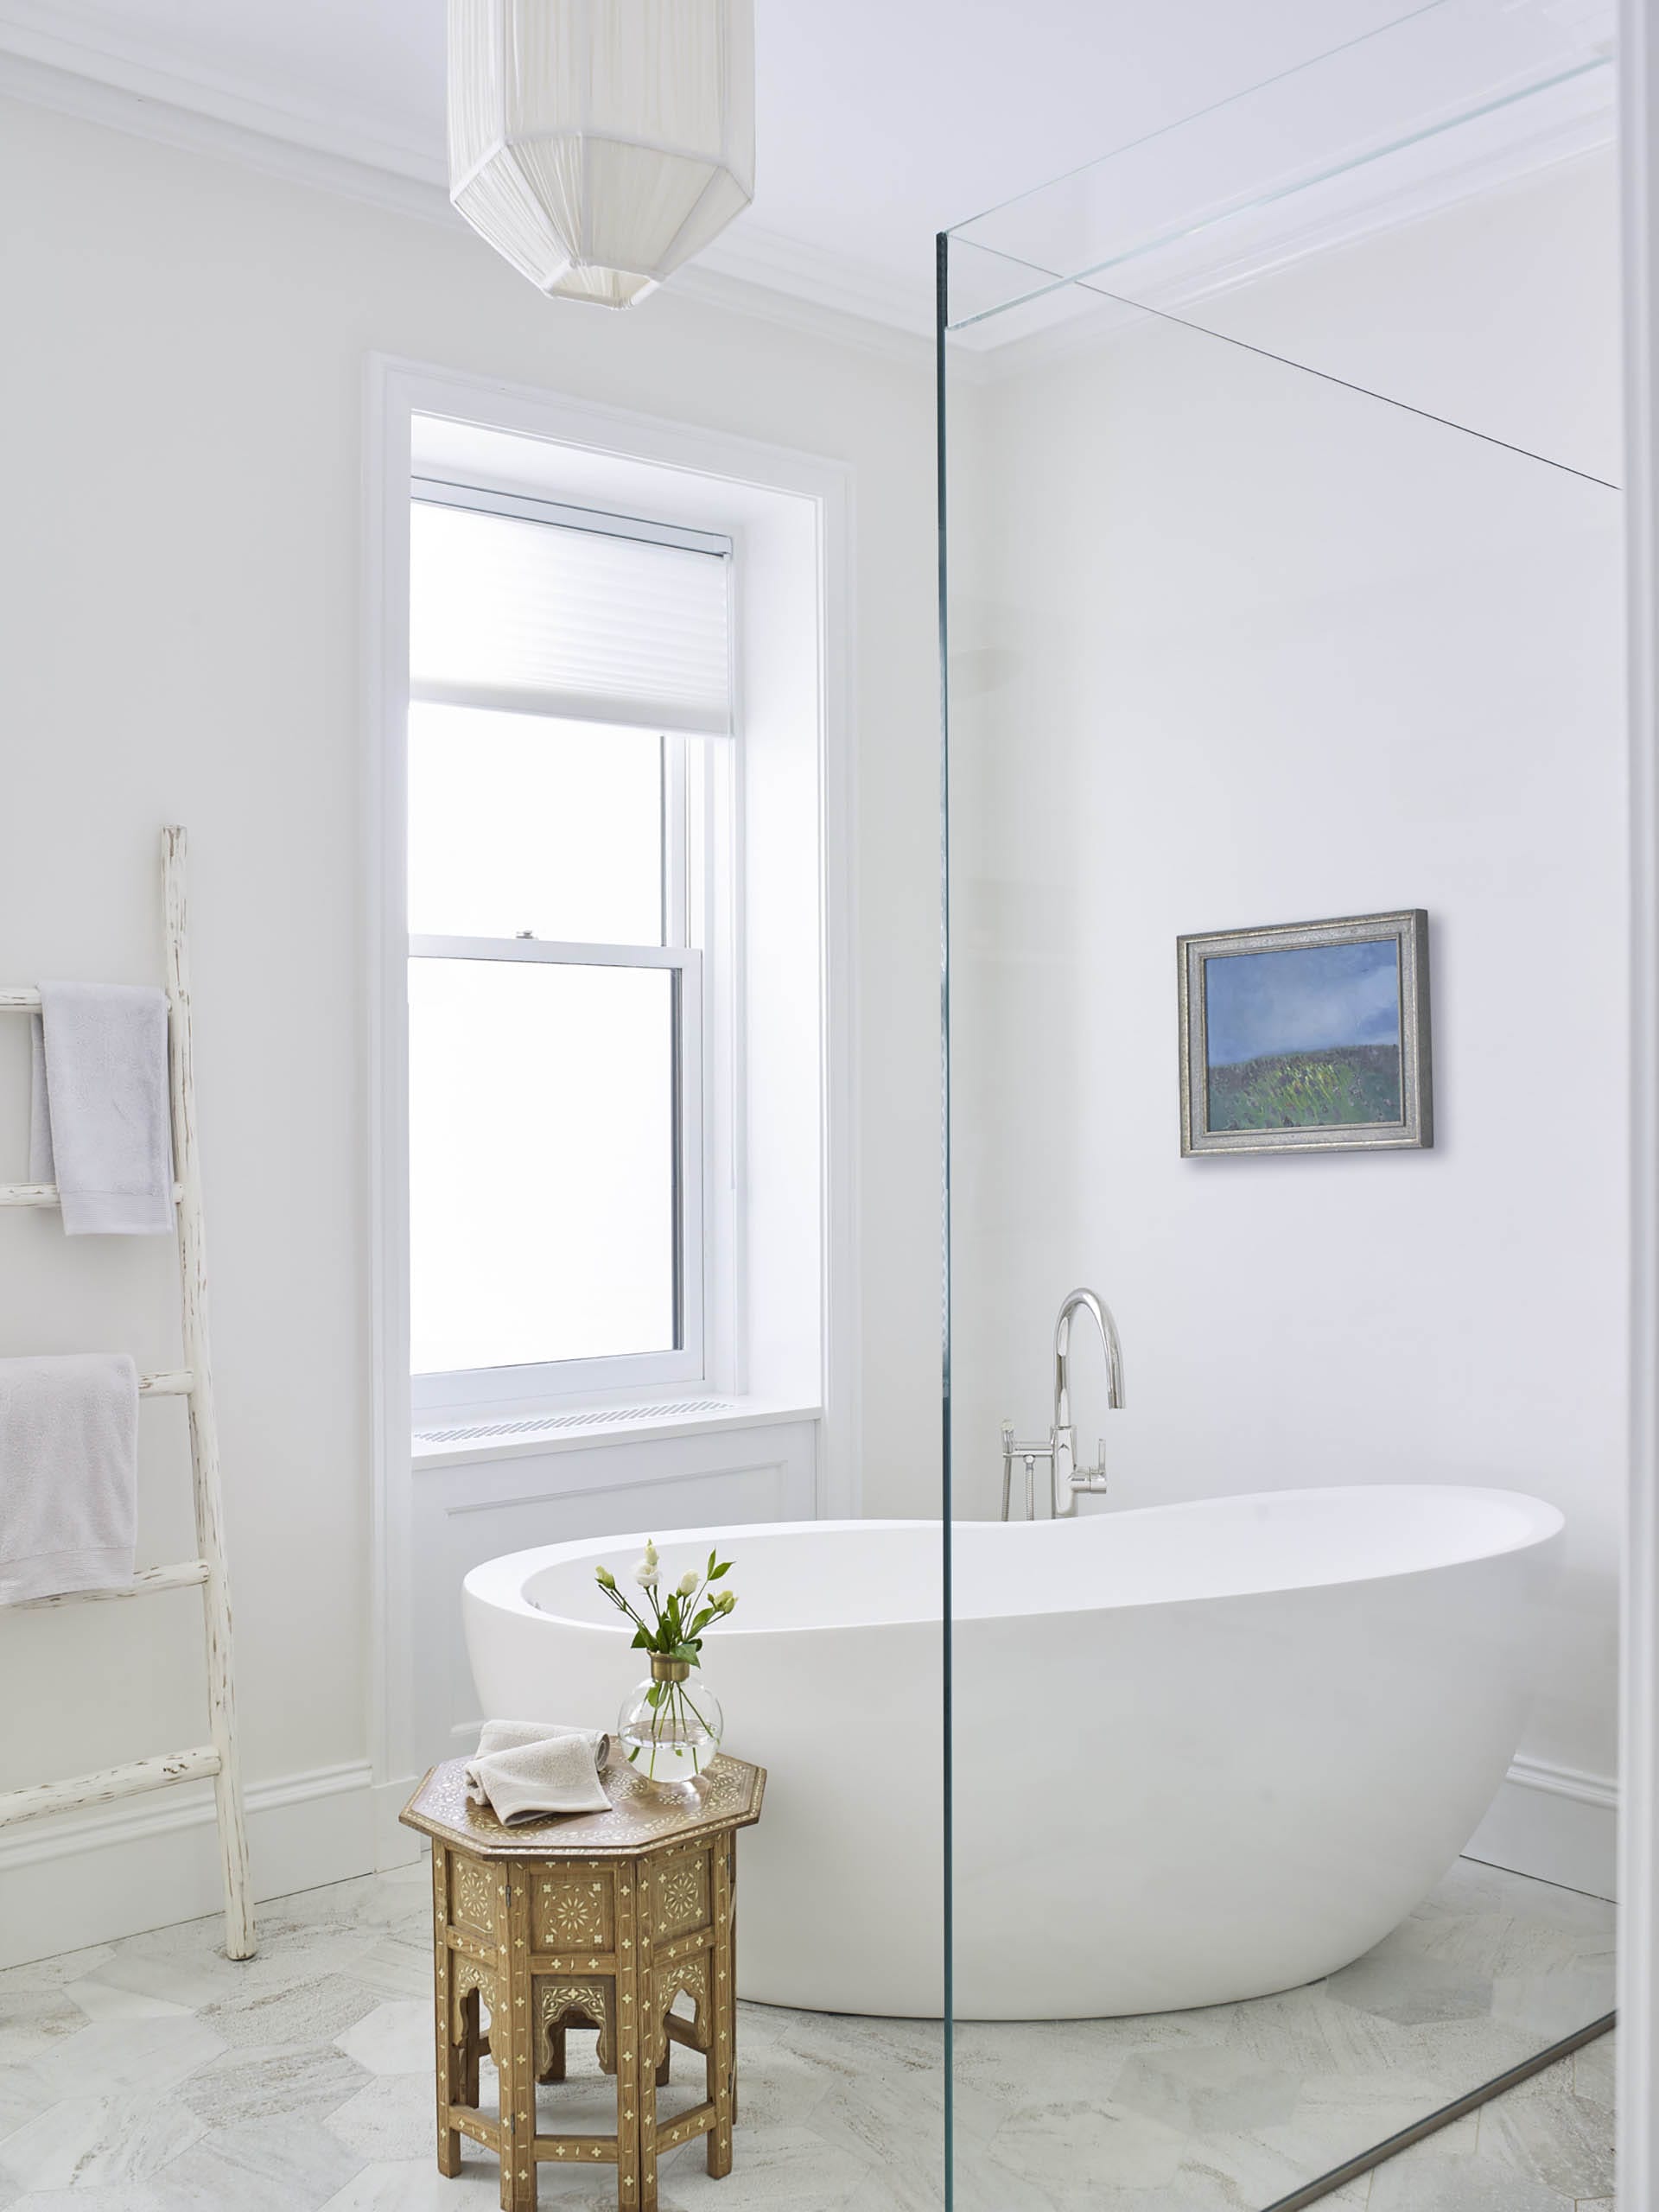 All white primary bathroom with a freestanding tub, shower stall, and painting of a meadow on the wall.